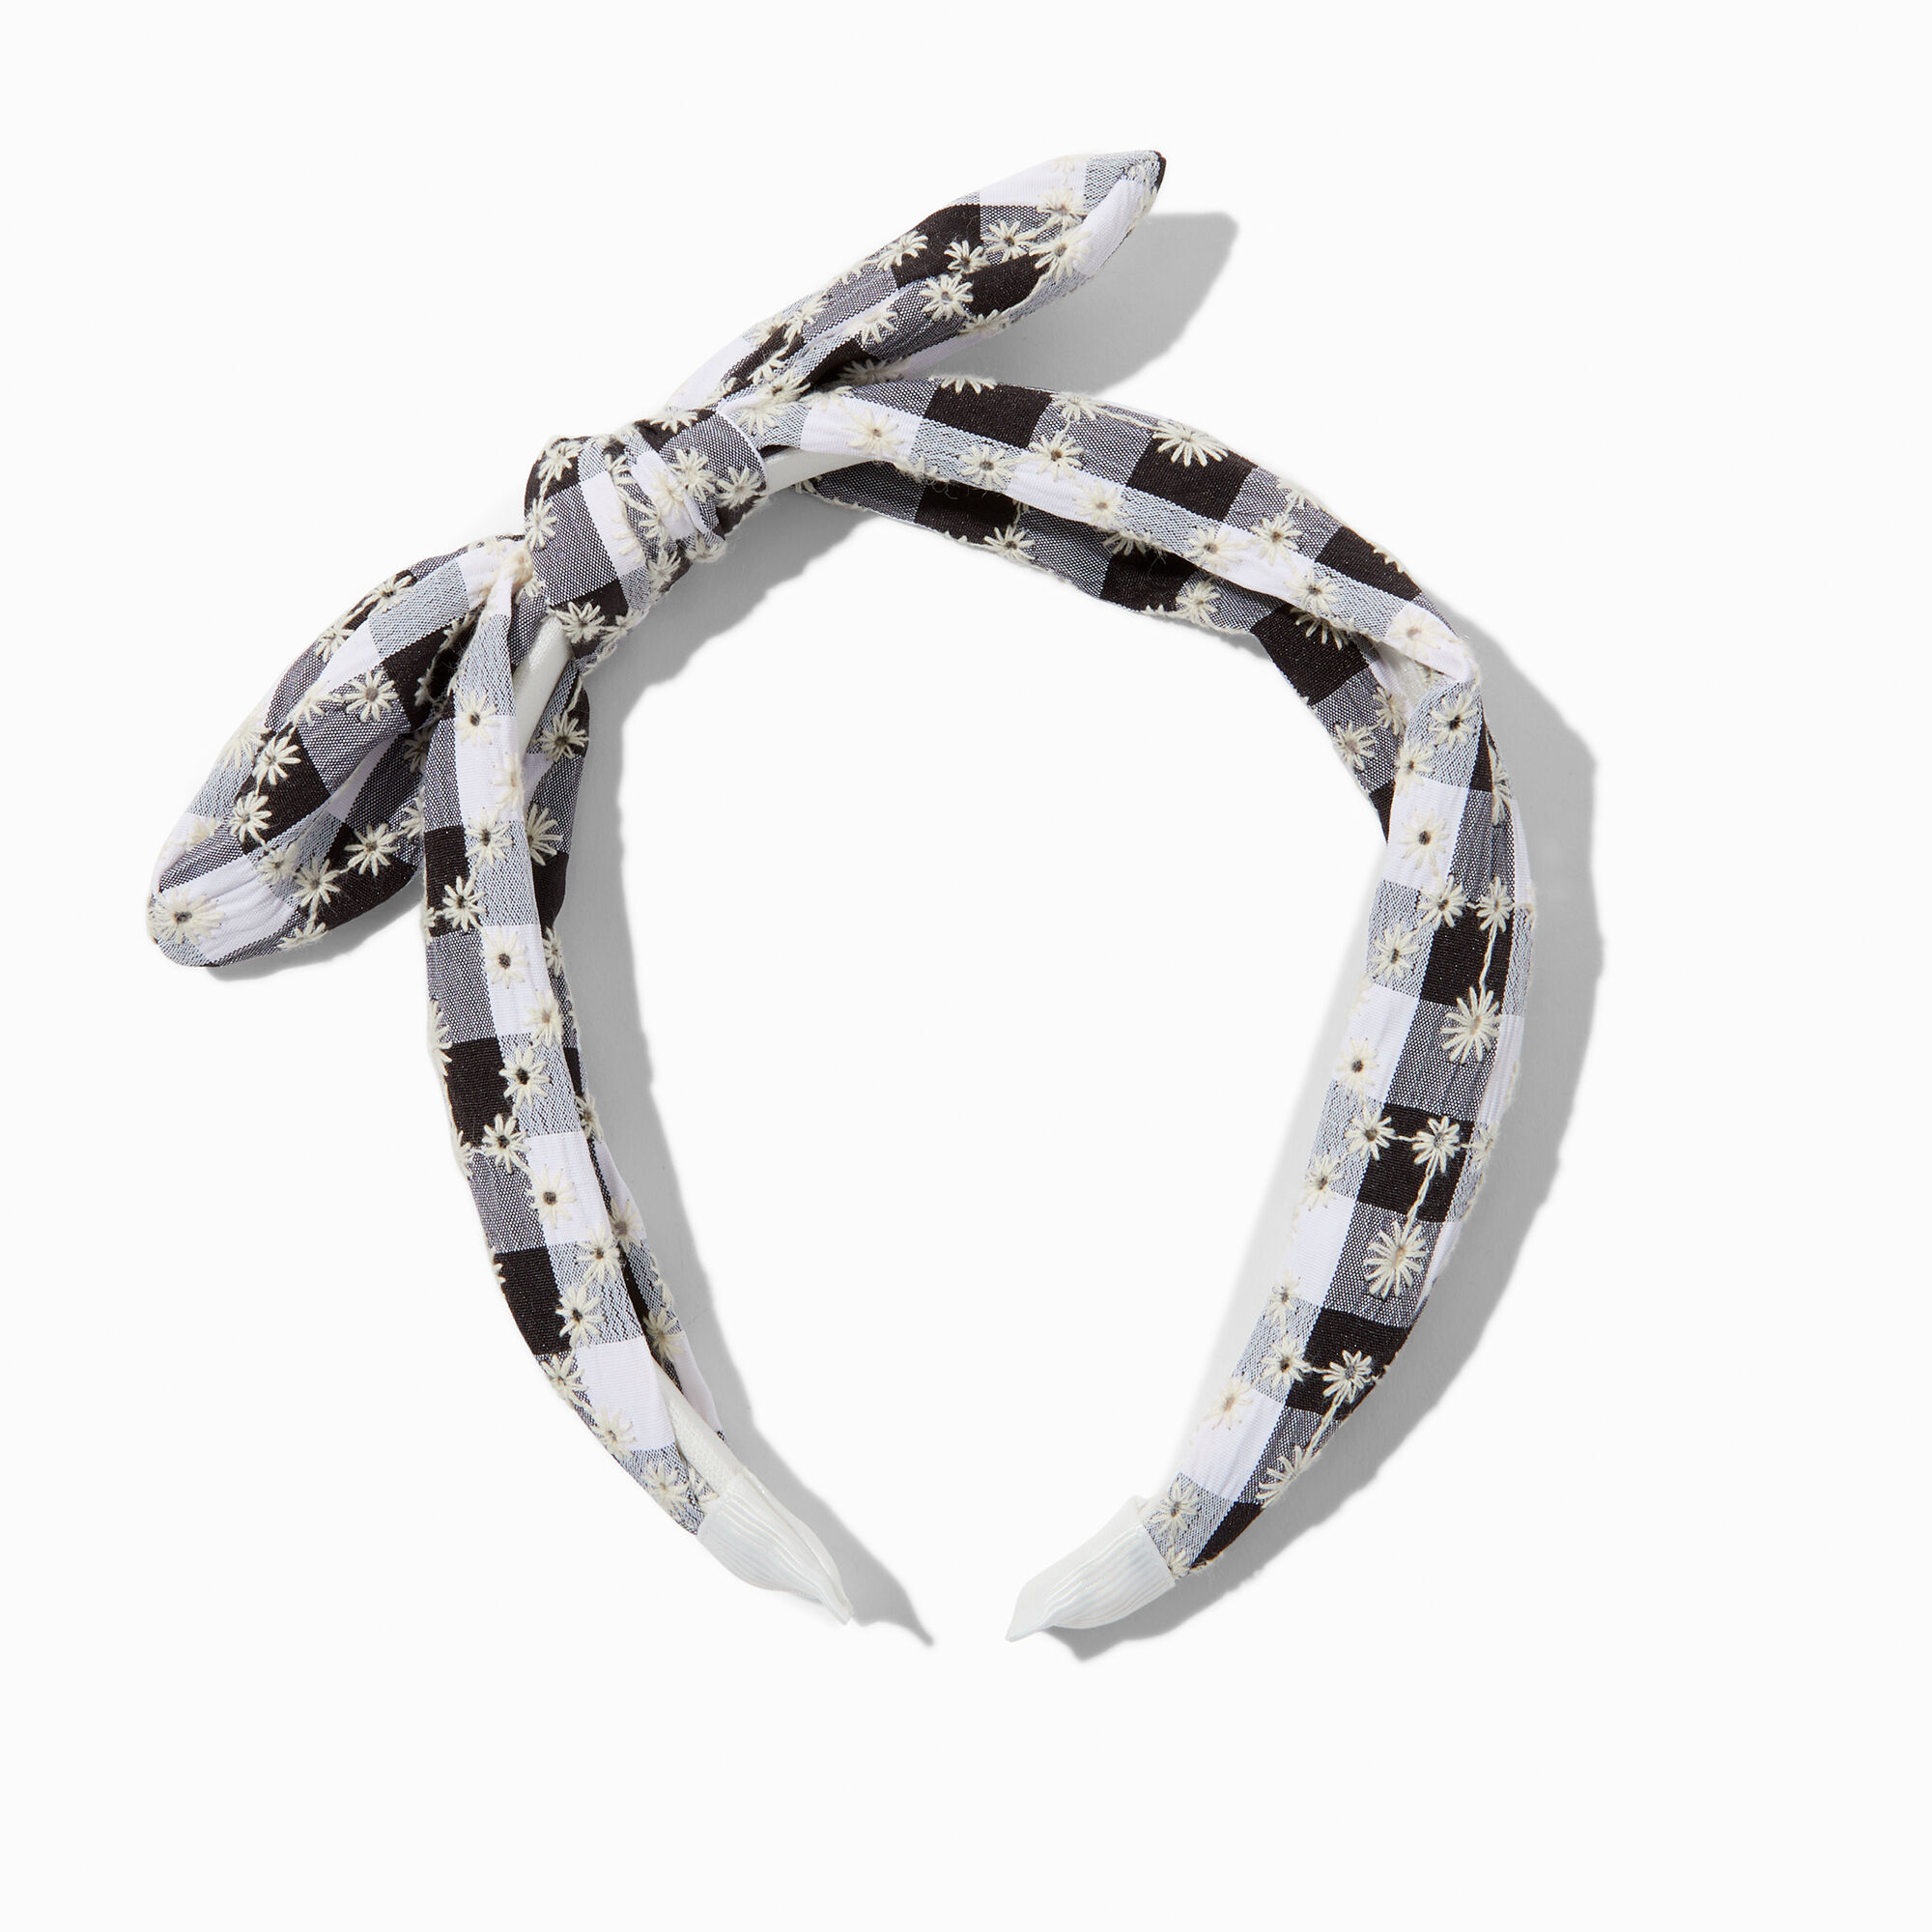 View Claires Gingham Daisy Knotted Bow Headband Black information